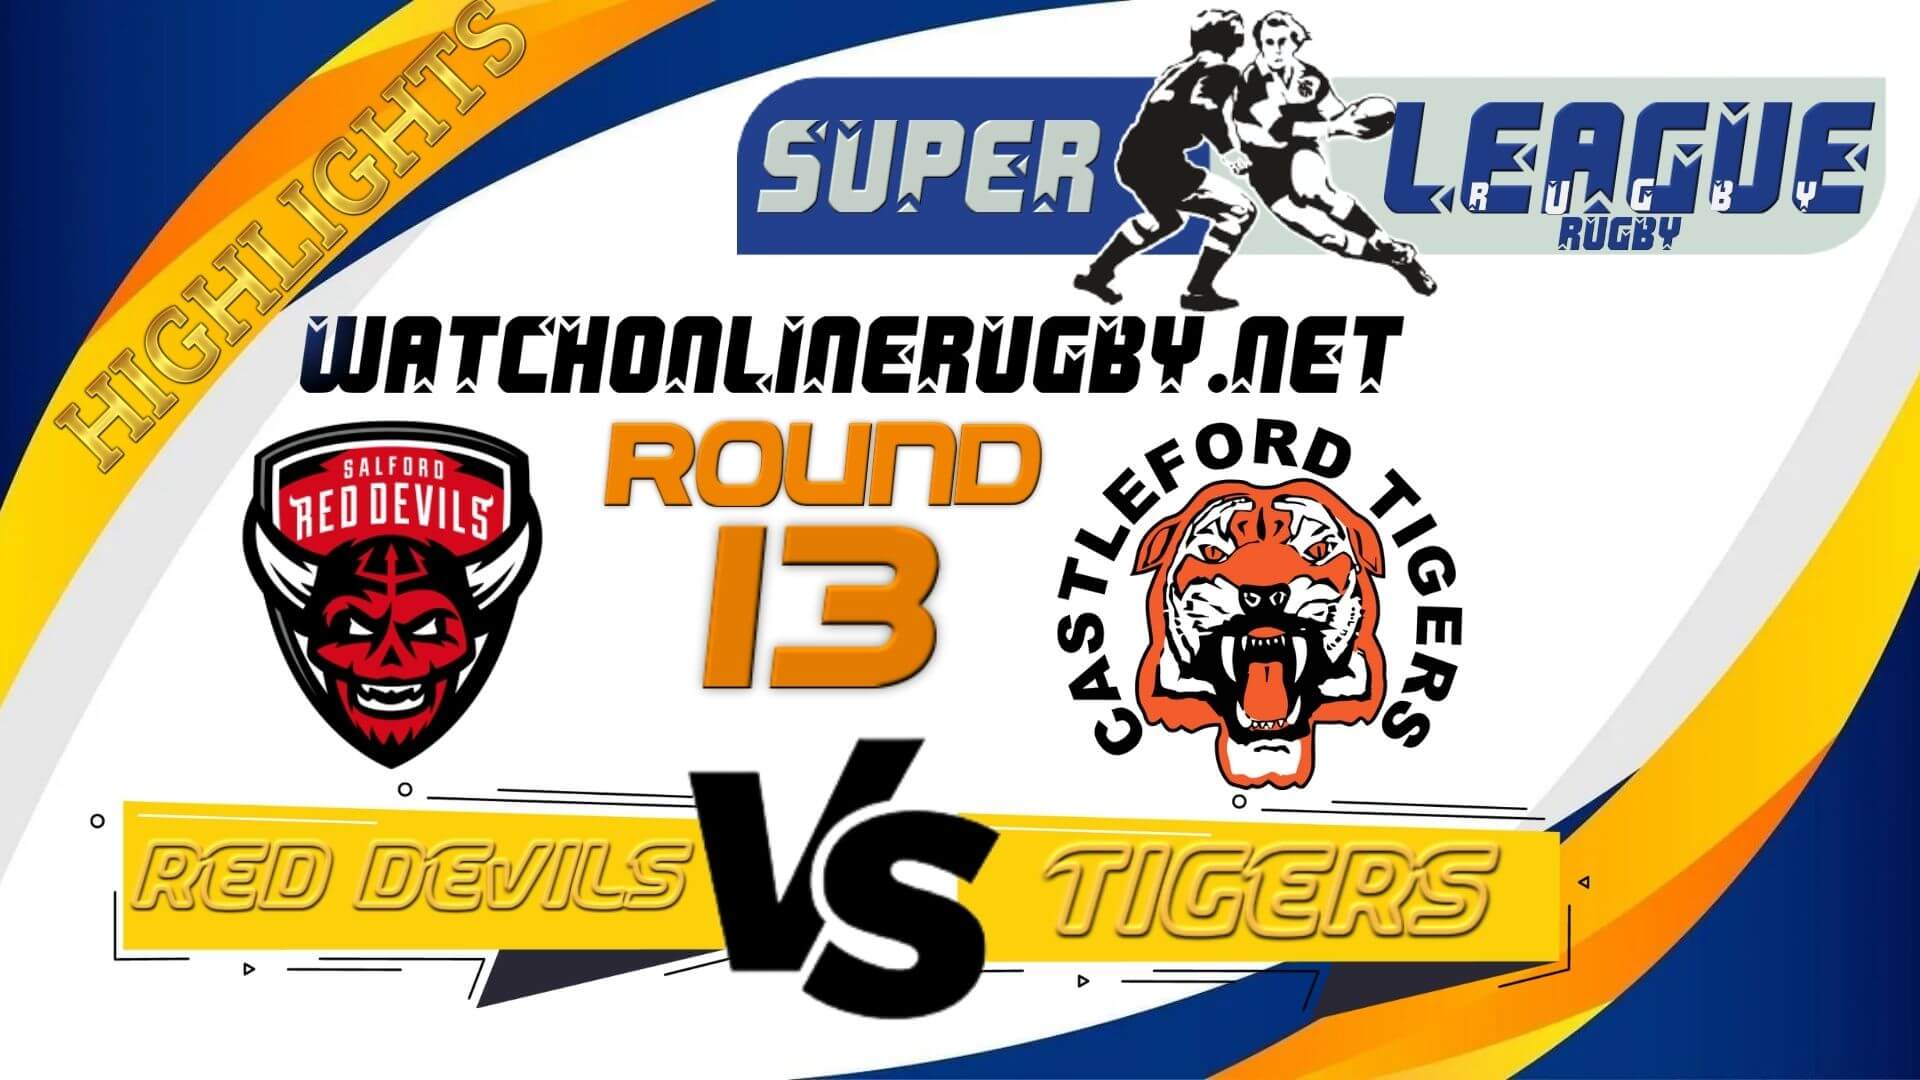 Salford Red Devils Vs Castleford Tigers Super League Rugby 2022 RD 13